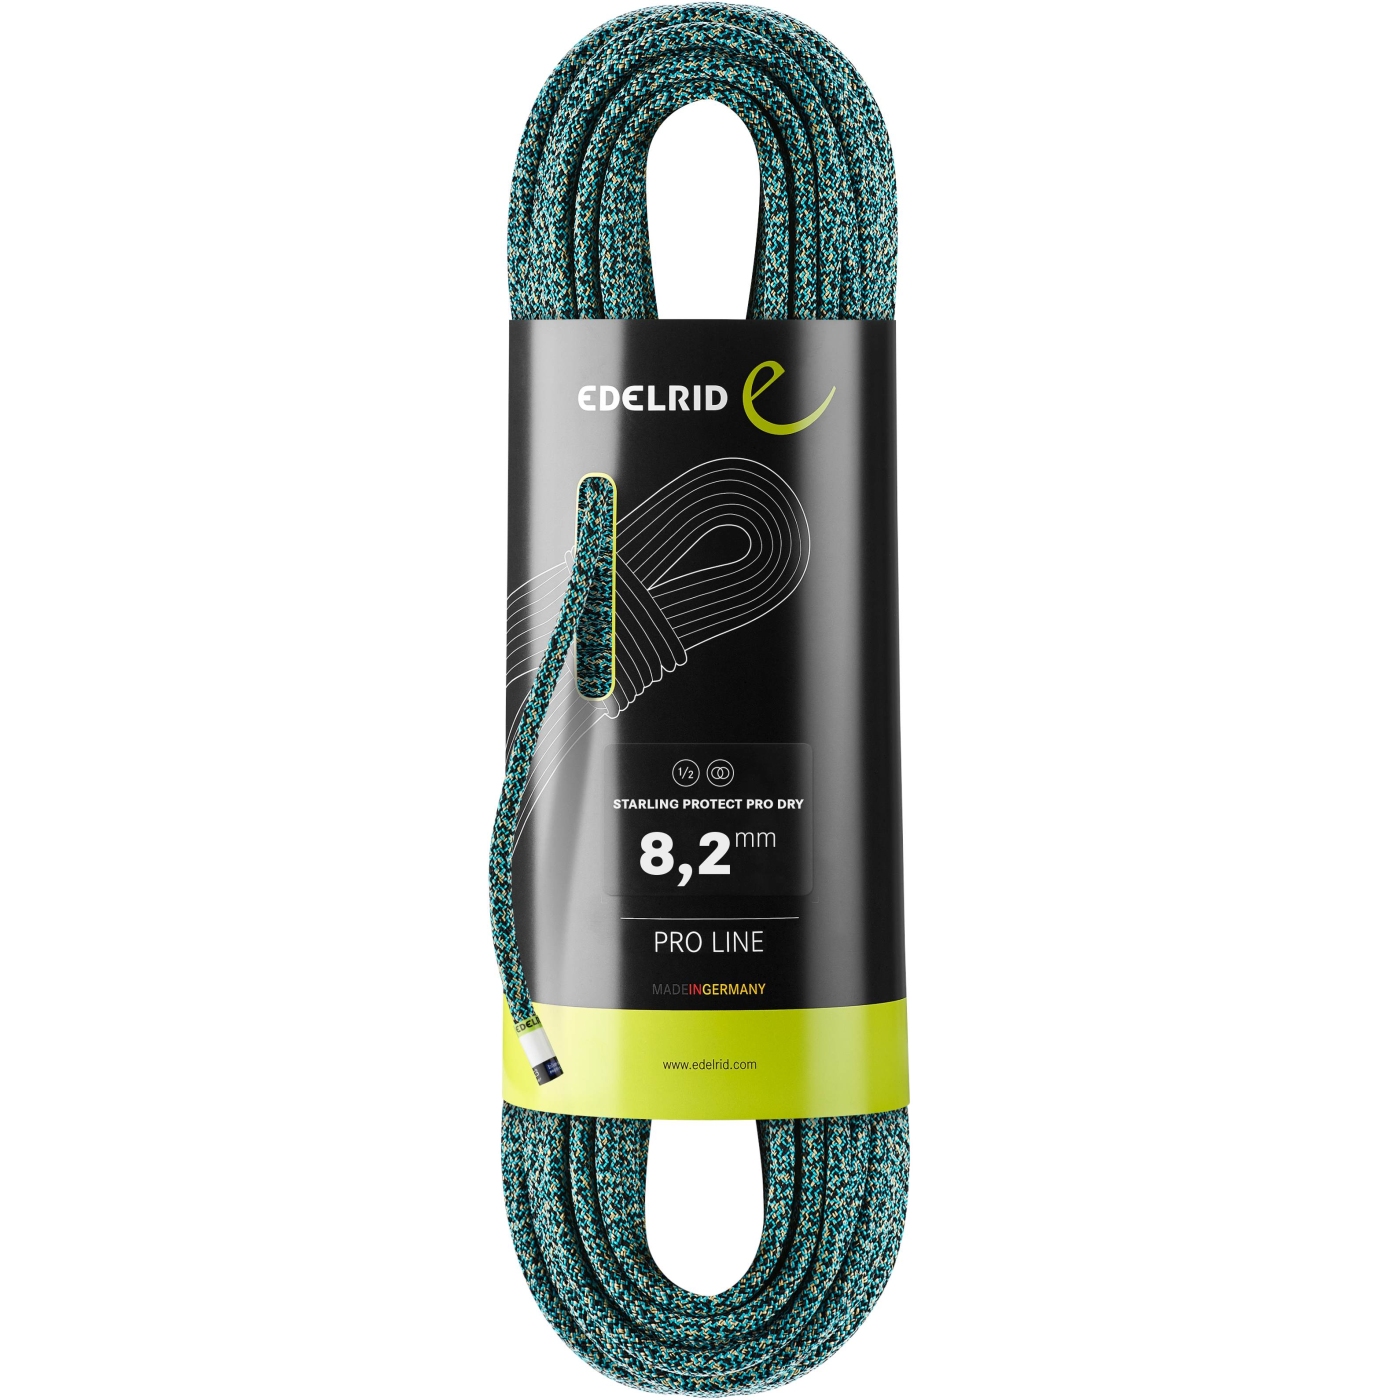 Picture of Edelrid Starling Protect Pro Dry 8,2mm Rope - 50m - icemint-night